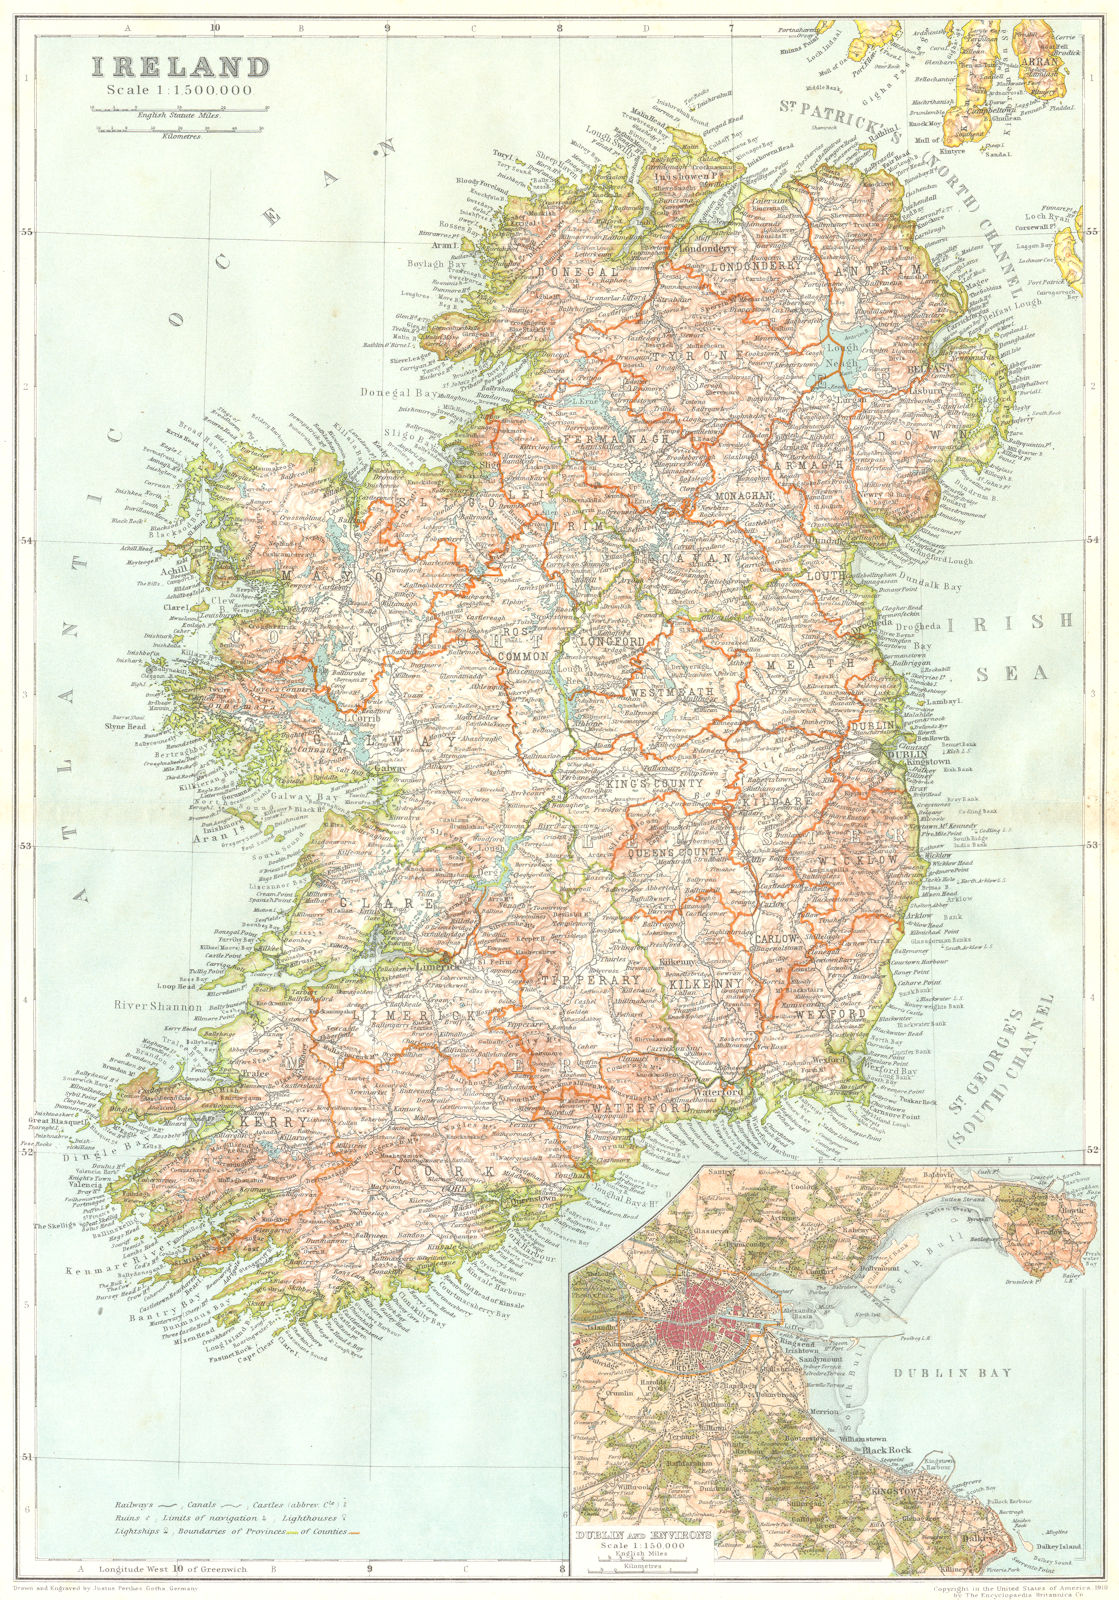 Associate Product IRELAND. Ireland; Inset map of Dublin and Environs 1910 old antique chart